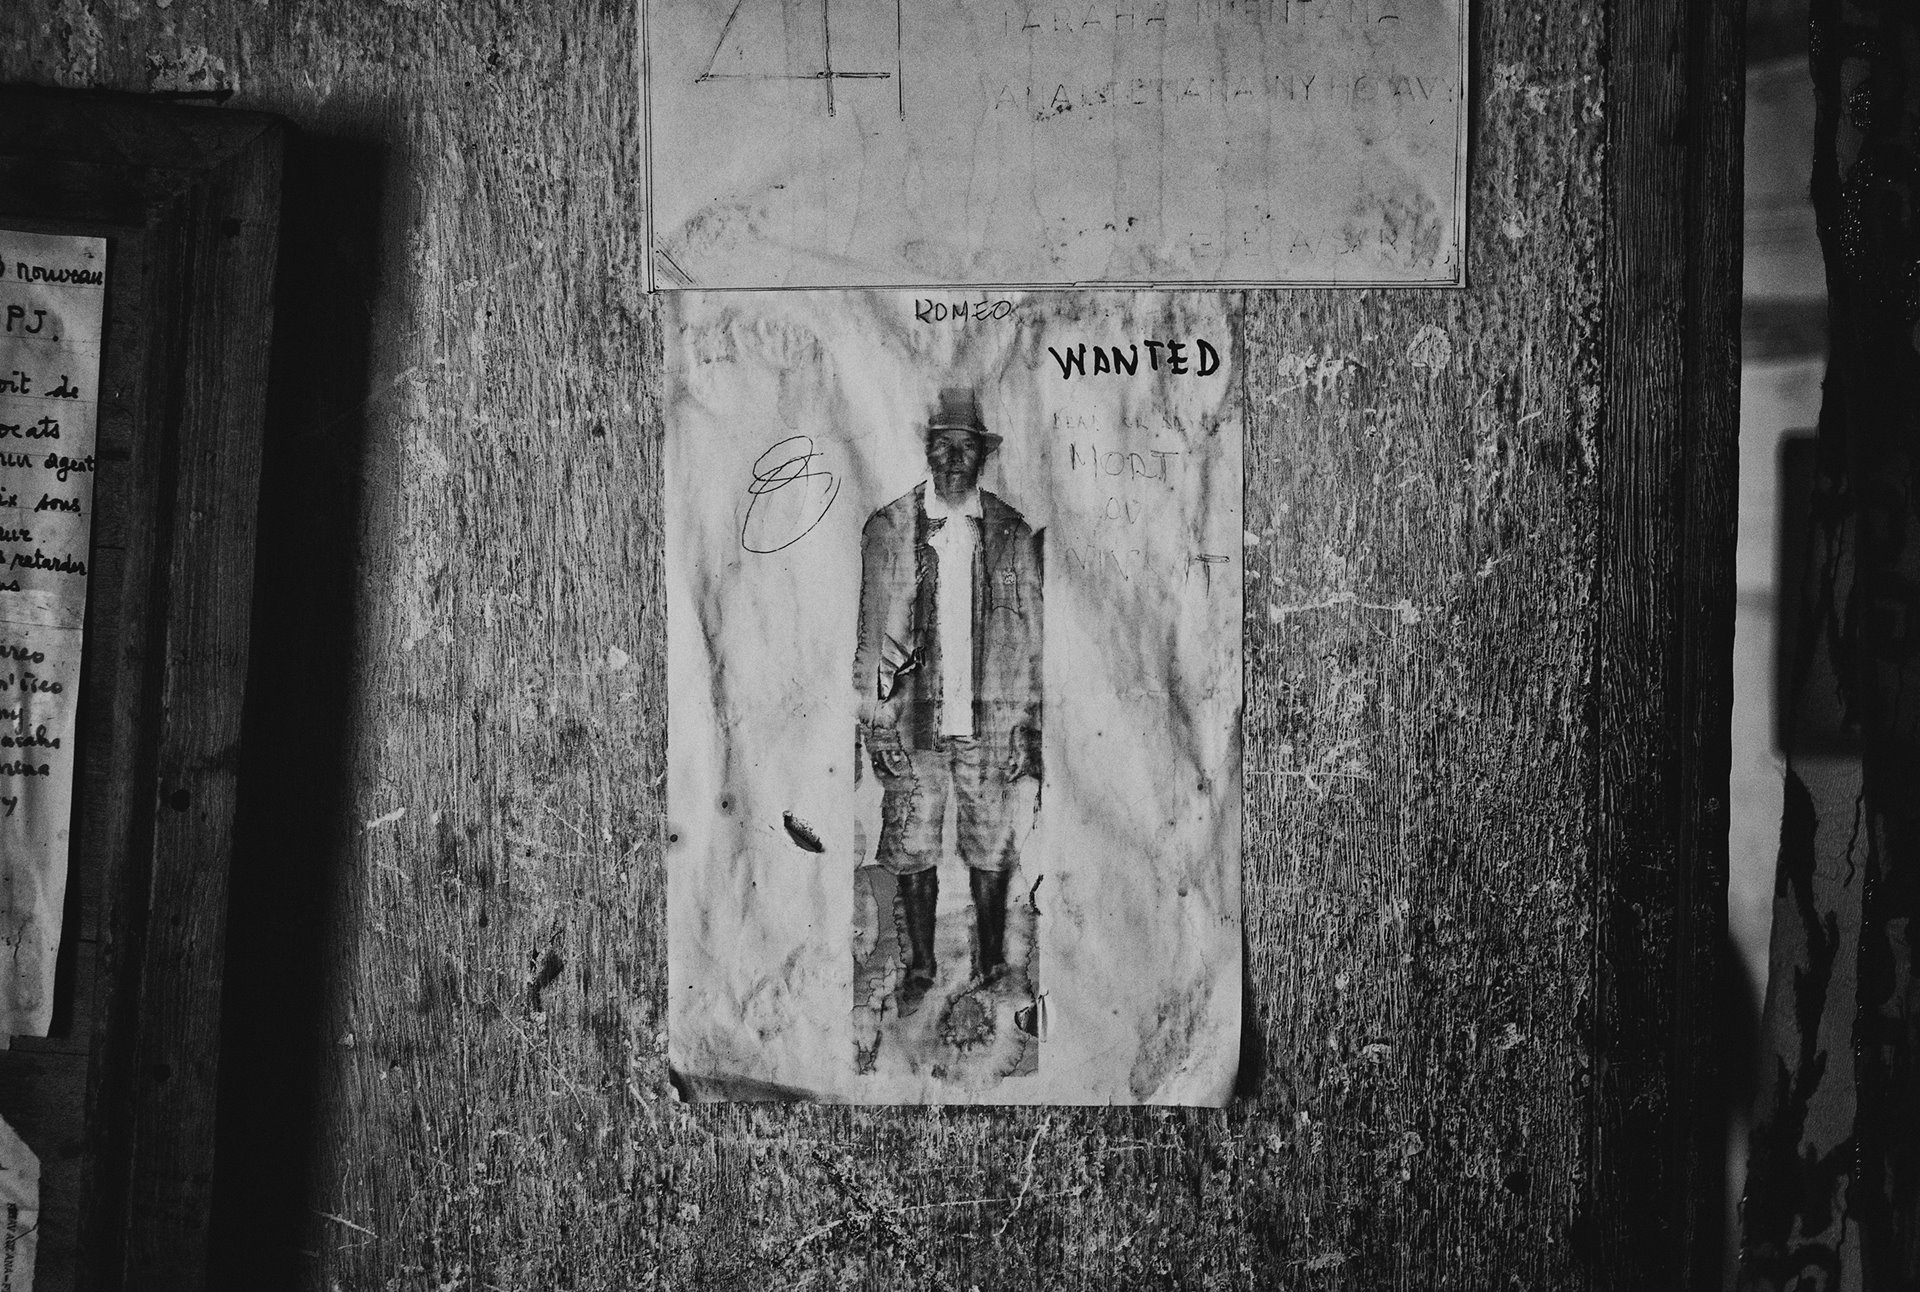 A photograph of Arthur Rabefihavanana, most commonly known as Remenabila, is displayed on the wall of the police station in Amboasary Sud, Madagascar. Remenabila, a former member of the presidential guard, led a group of 400 dahalo cattle thieves, according to a high-ranking official. On 9 June 2012, the heavily armed band killed 12 people, mostly military officers. This event placed Remenabila&rsquo;s group at the center of the government&rsquo;s anti-dahalo operations.